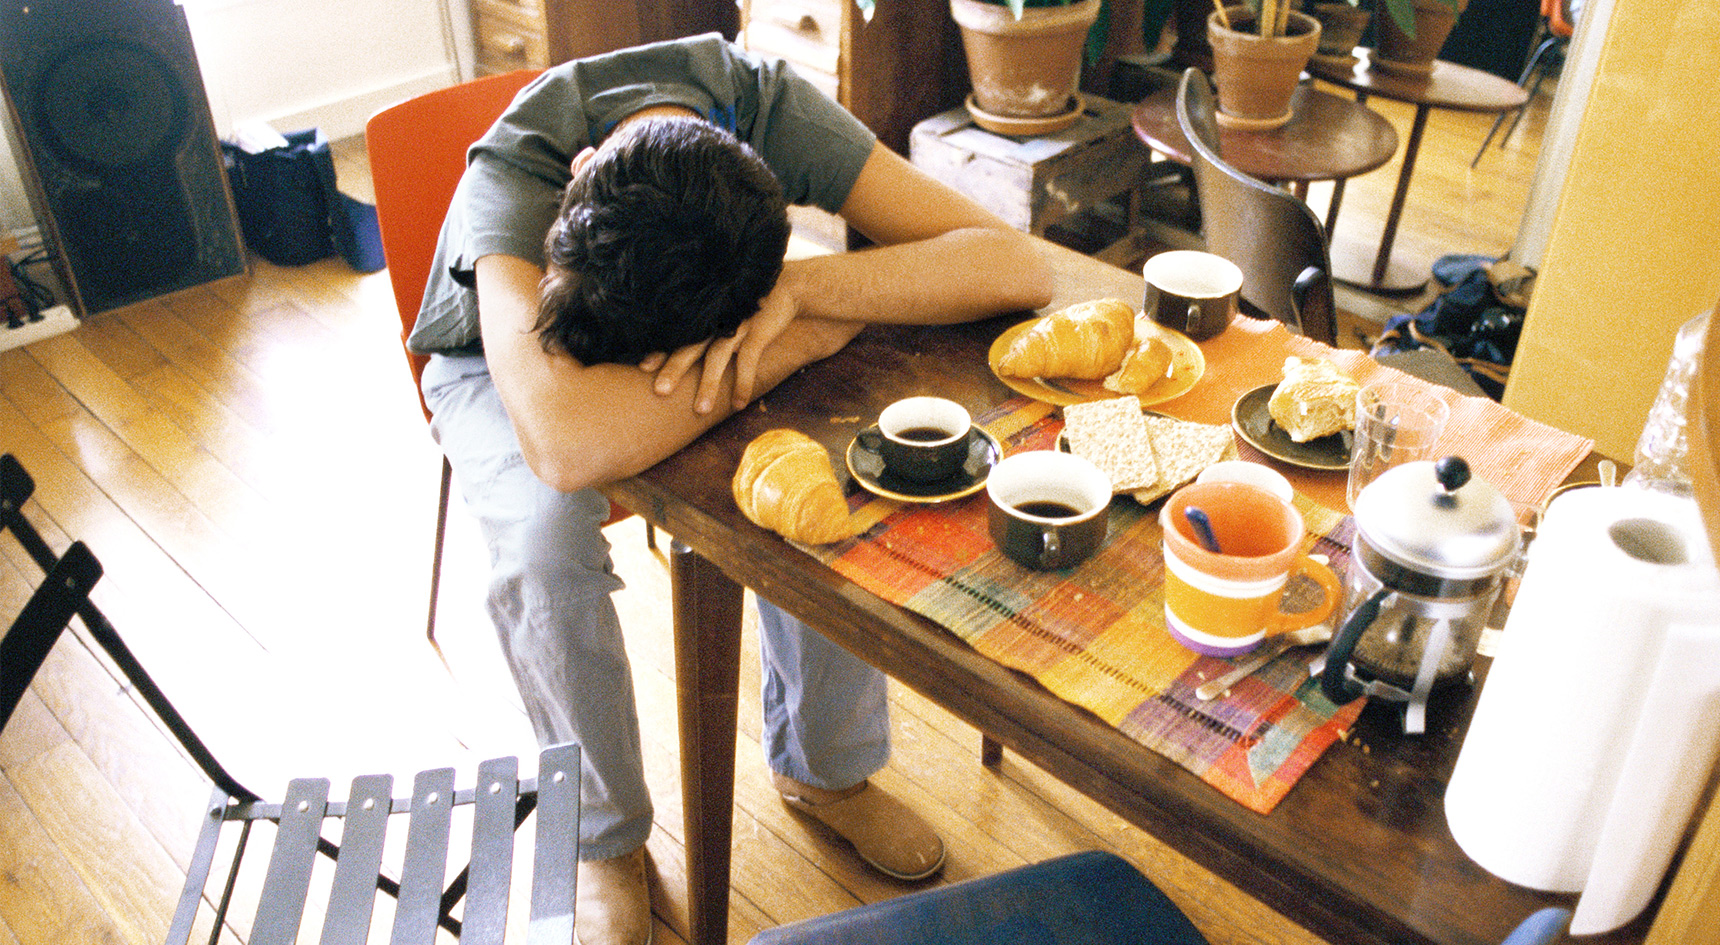 Man sleeping on a table in front of his breakfast